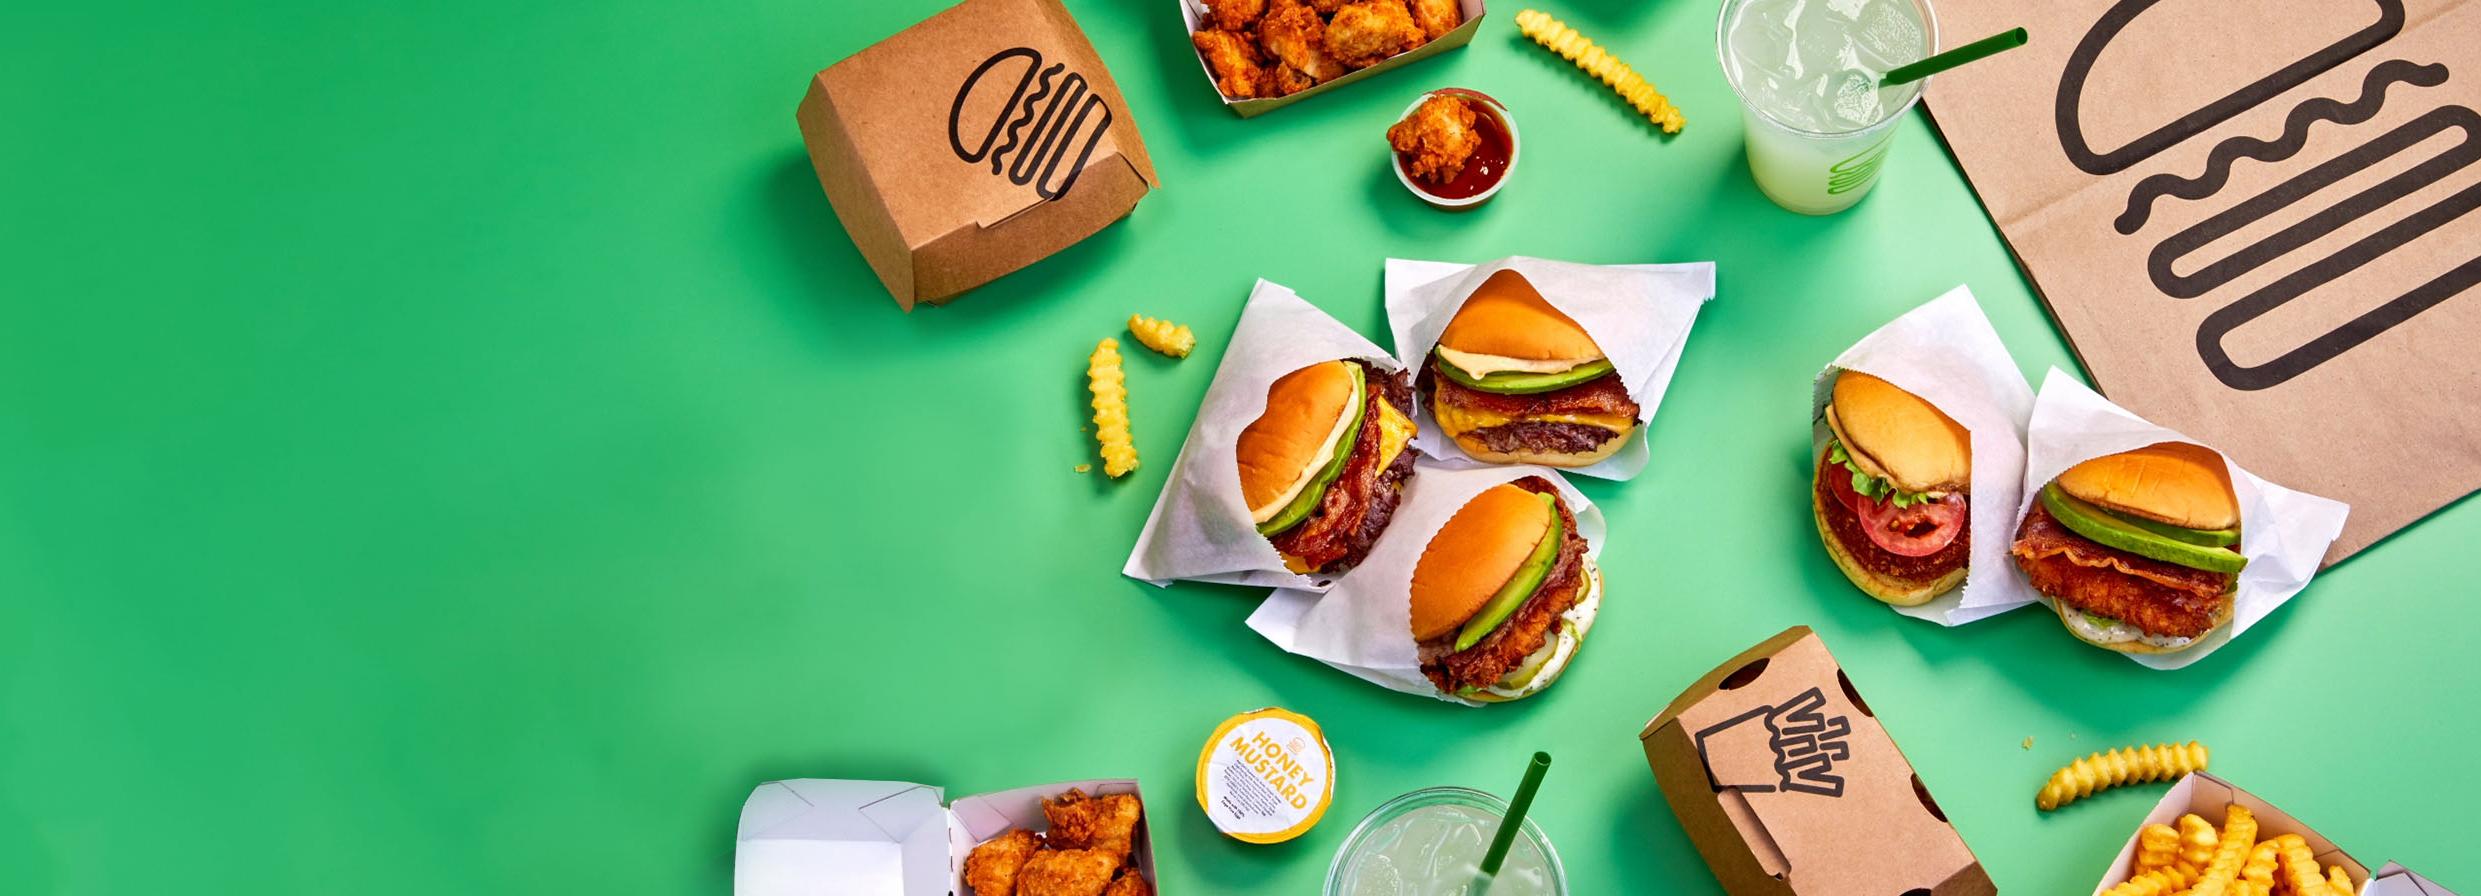 Homepage Group of food on green background with delivery packaging